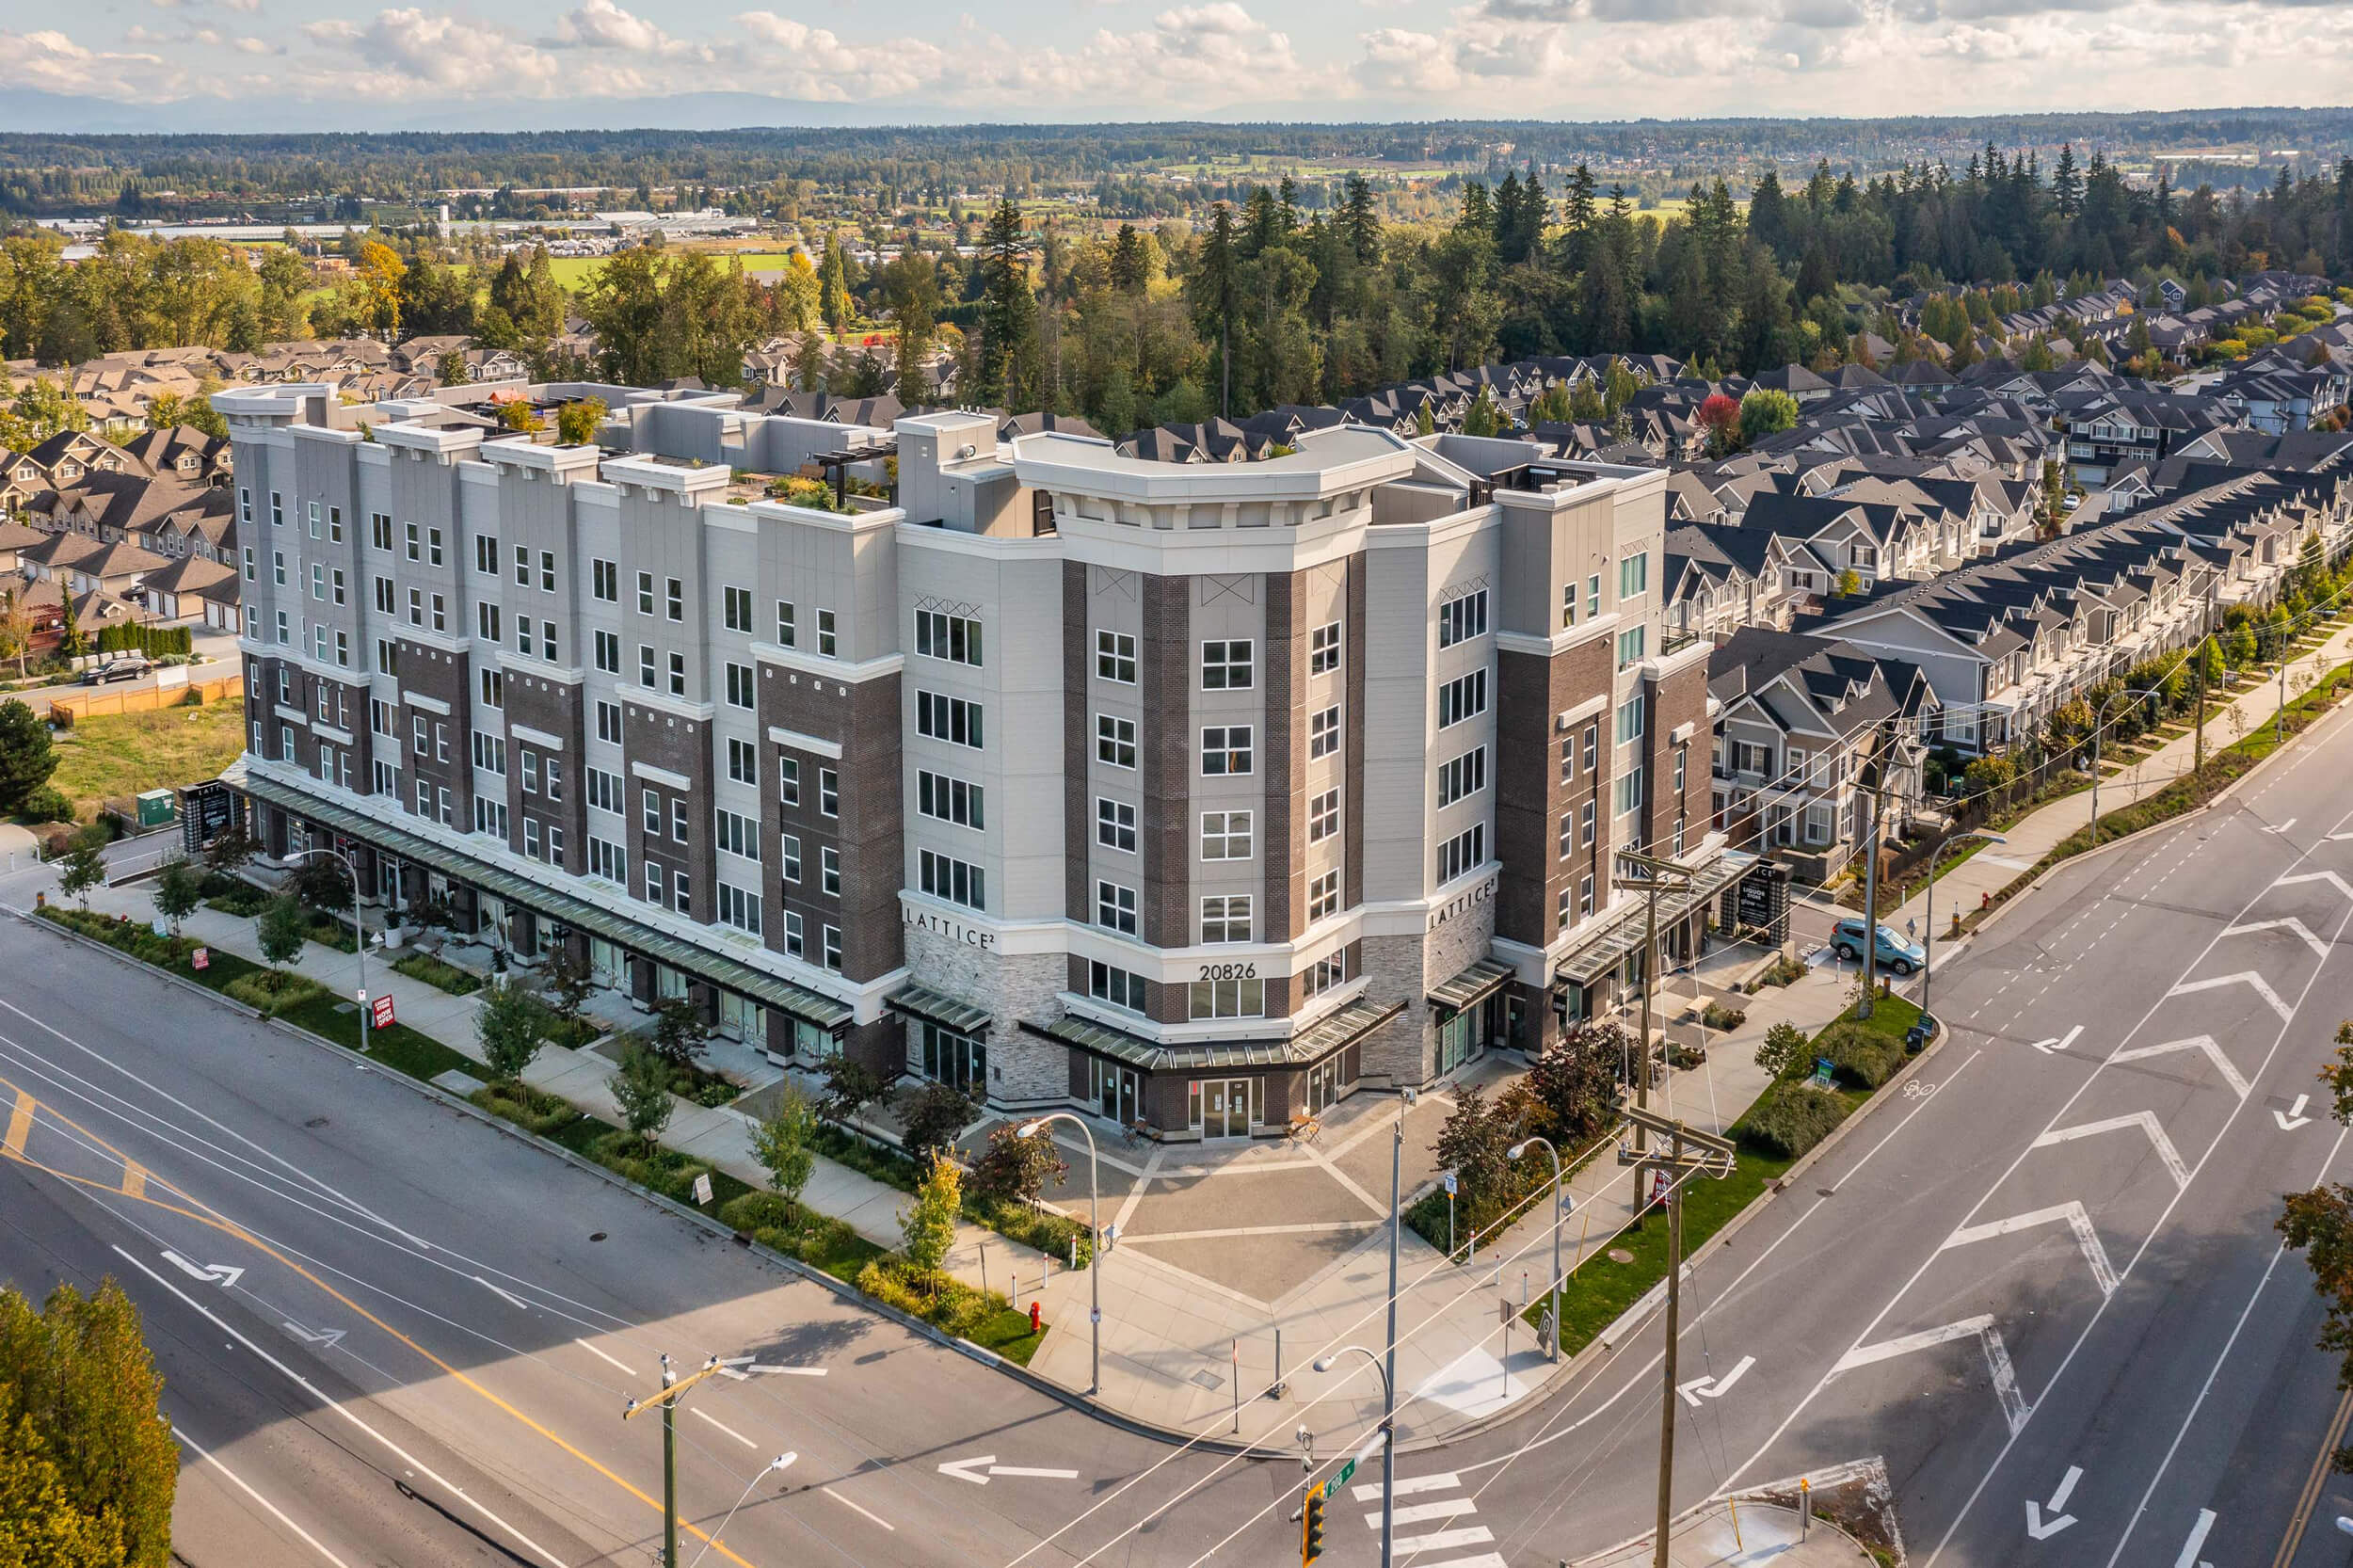 The “Lattice” development is a 6-storey mixed-use project in Langley, British Columbia. Design by Group 161 | Barnett Dembek Architects